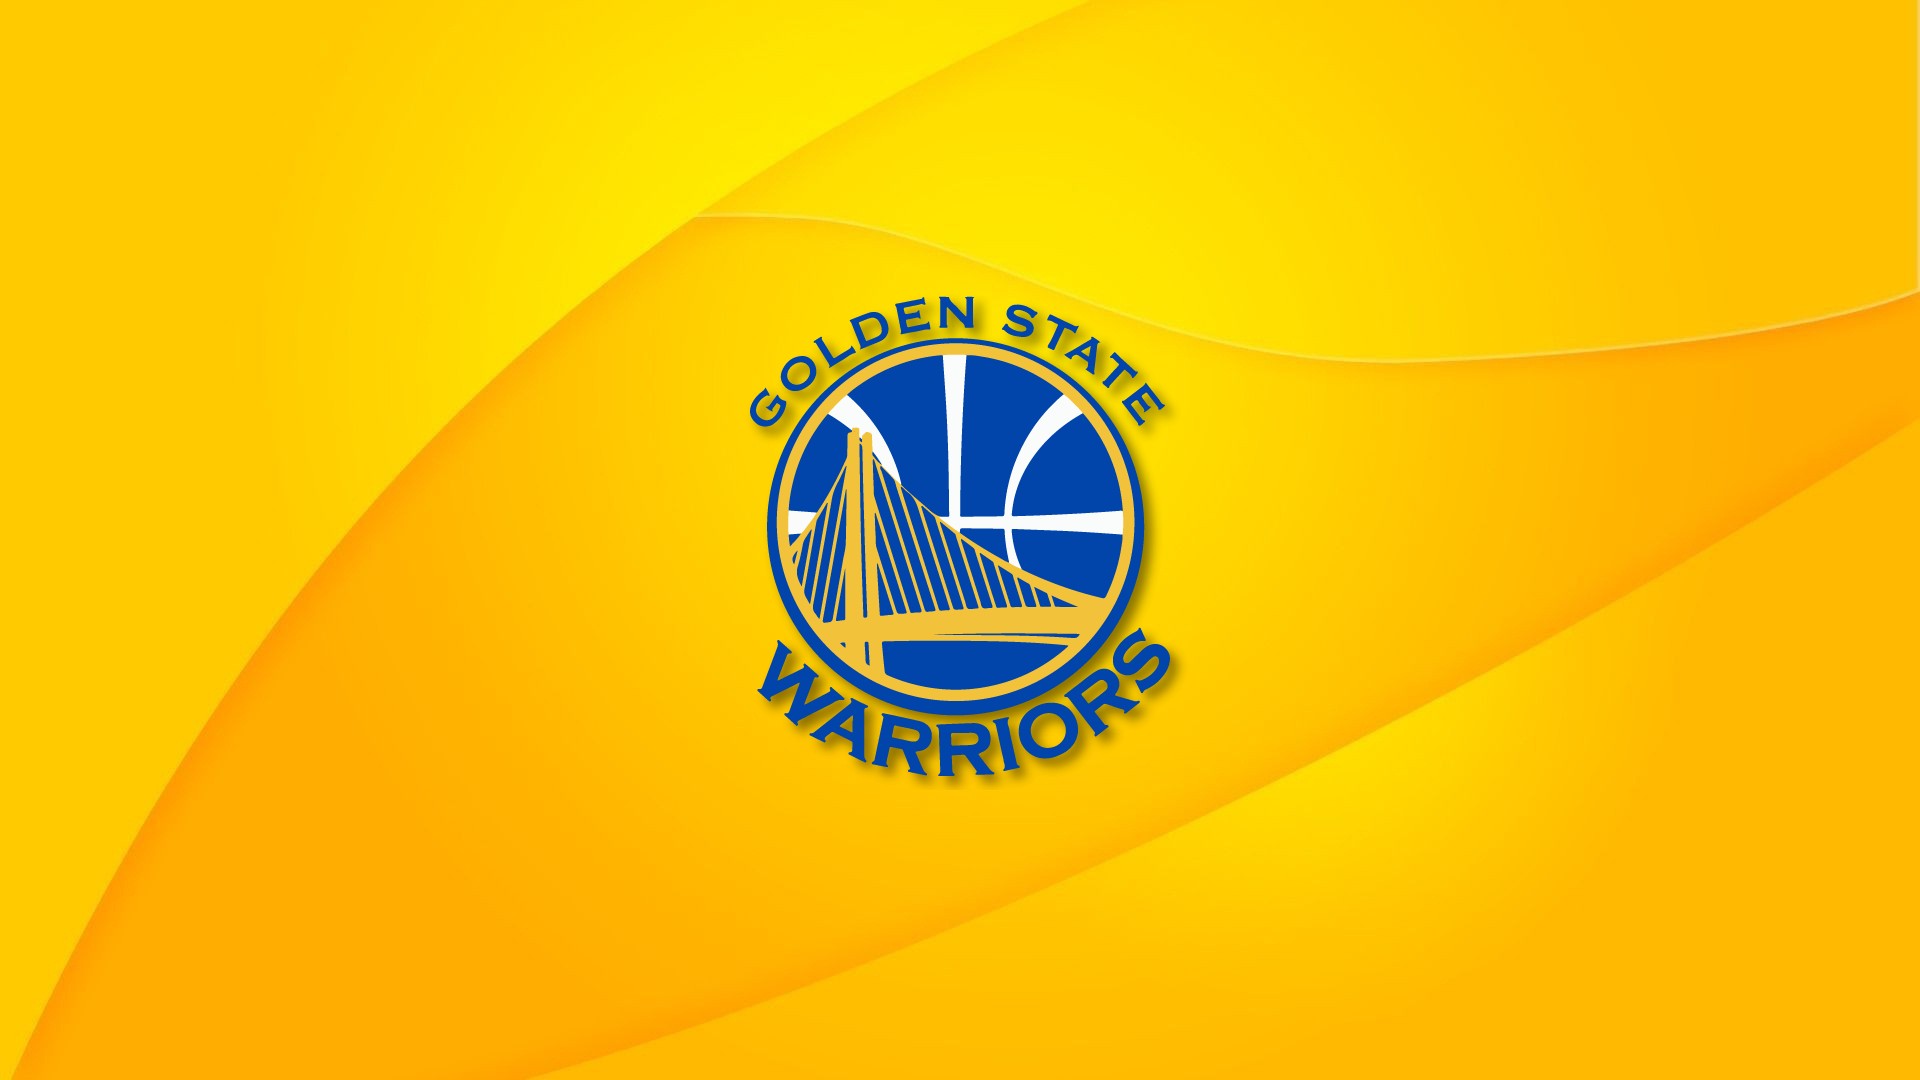 Golden State Warriors HD Backgrounds With Resolution 1920X1080 pixel. You can make this wallpaper for your Desktop Computer Backgrounds, Mac Wallpapers, Android Lock screen or iPhone Screensavers